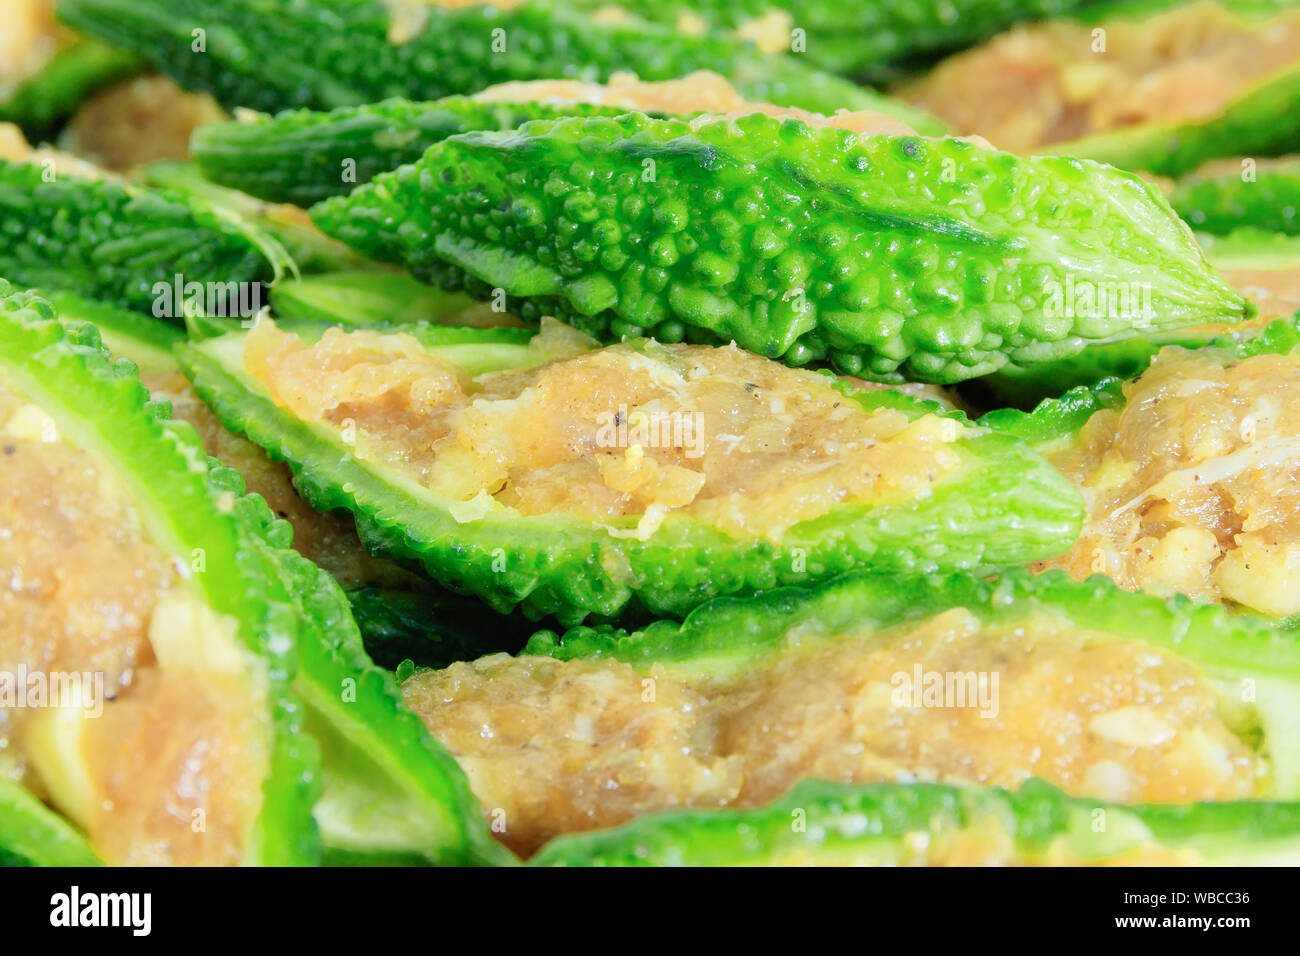 Close Up Bitter Gourd Pile With Stuffed Hack Pork And Garlic Black Pepper Ingredient Vegetable Herb Nourish The Health Body Thai Food Stock Photo Alamy